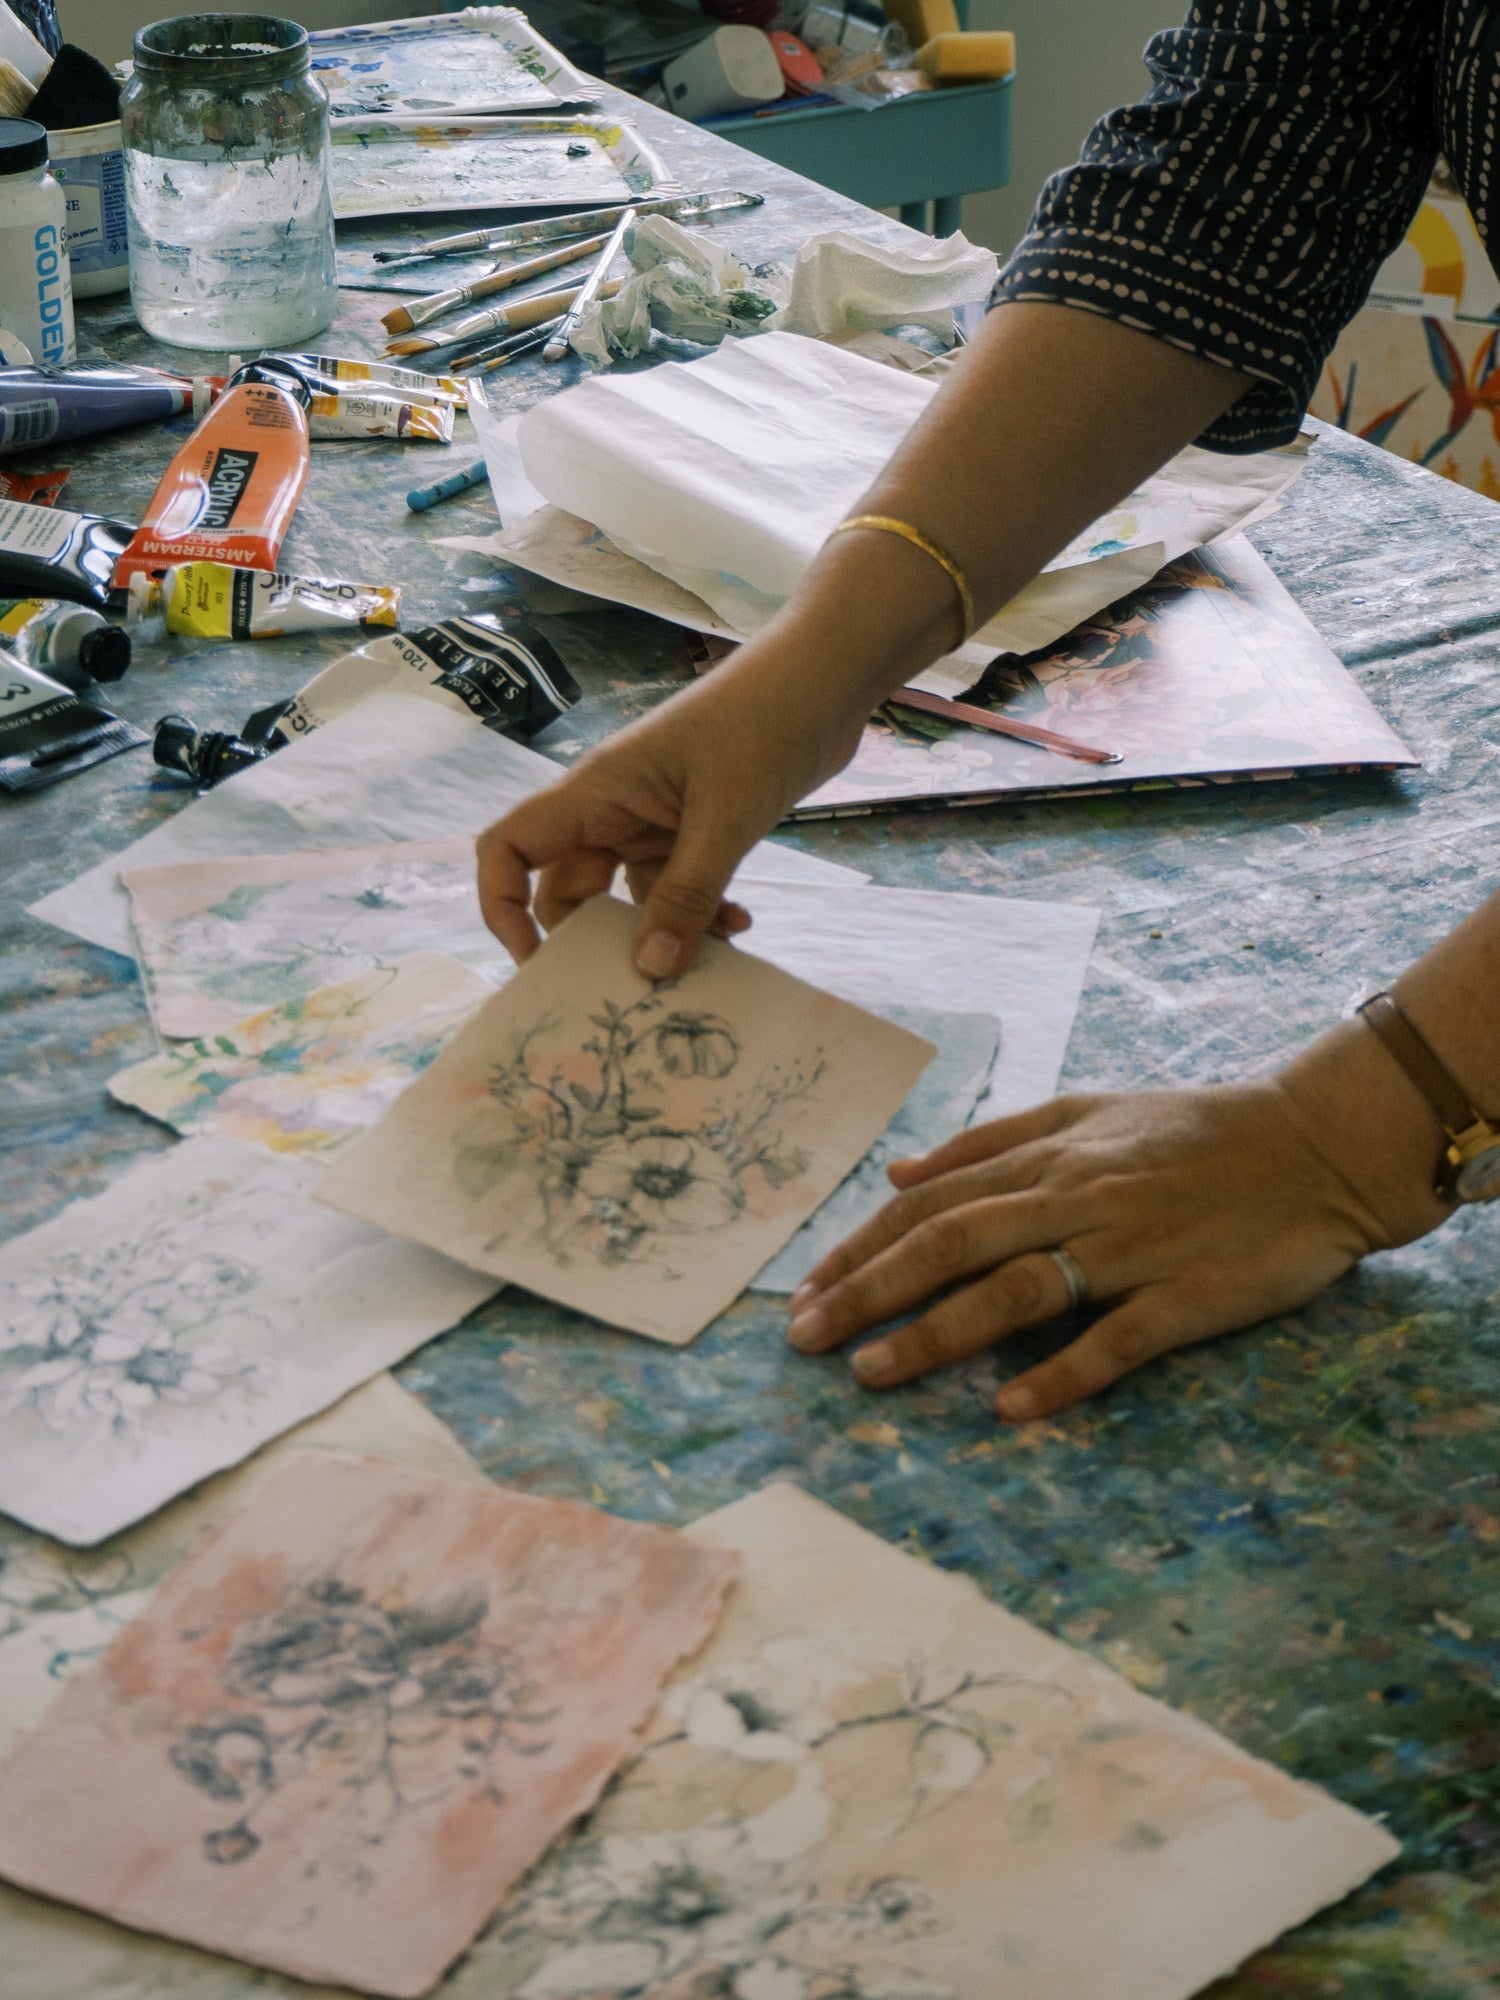 Sonal Nathwani's studio: A sanctuary where handmade paper is transformed into stunning works of art.